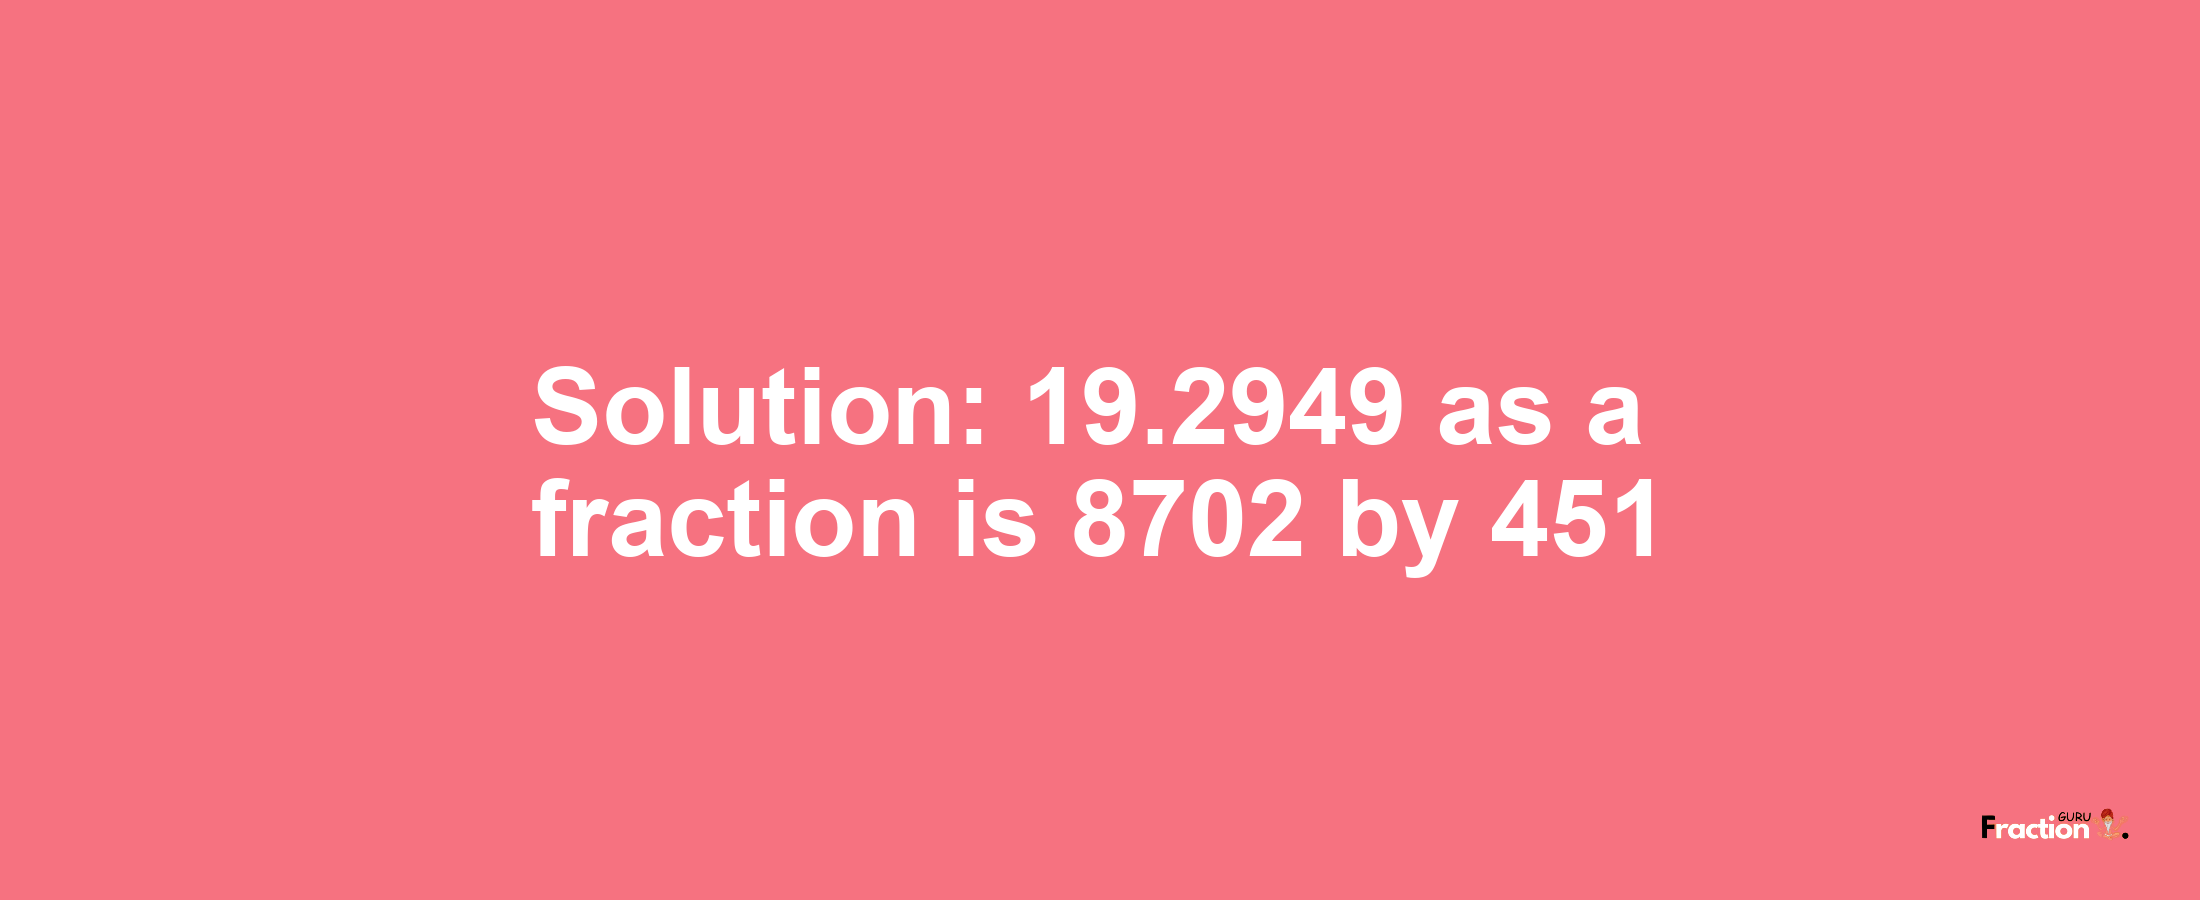 Solution:19.2949 as a fraction is 8702/451